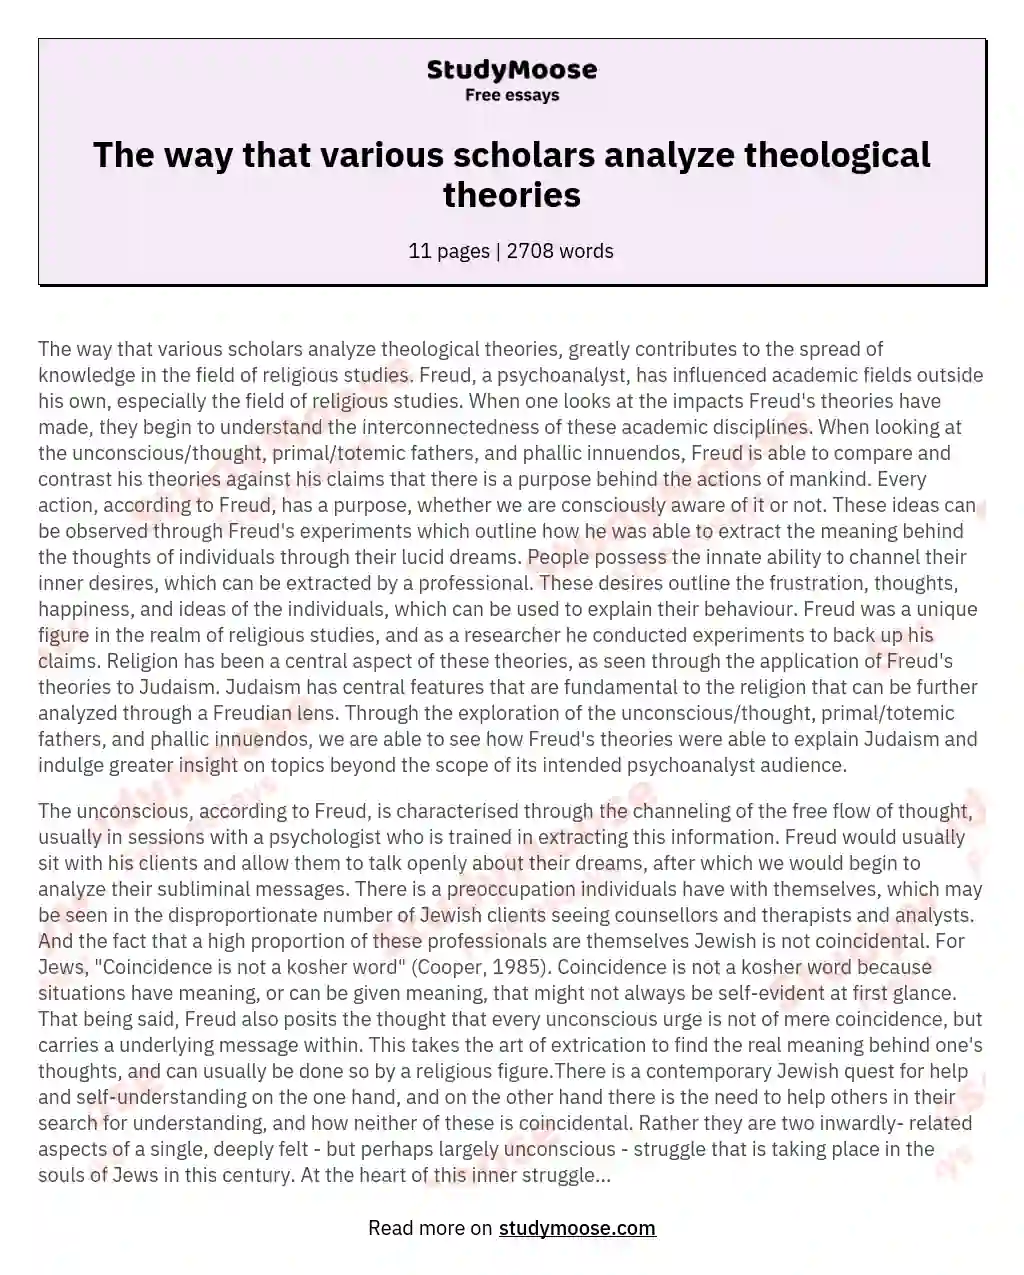 The way that various scholars analyze theological theories essay